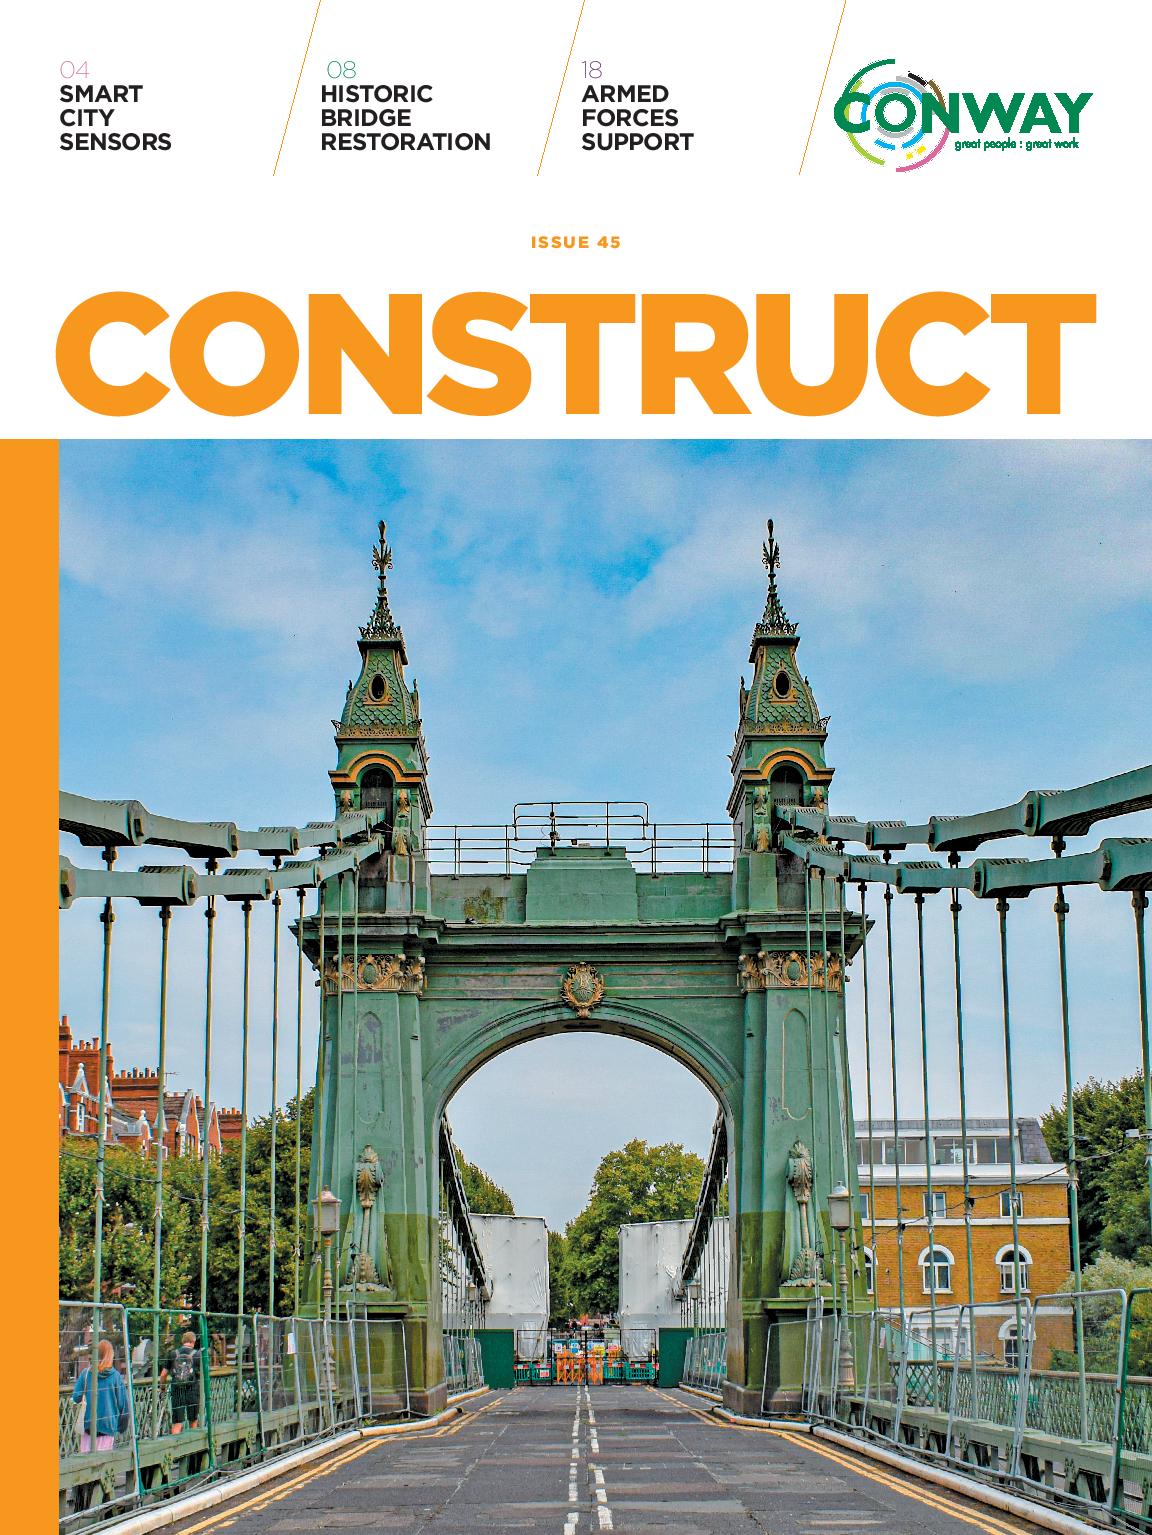 /files/library/images/Construct/00_Cover_Construct_Issue45-page-001.jpg